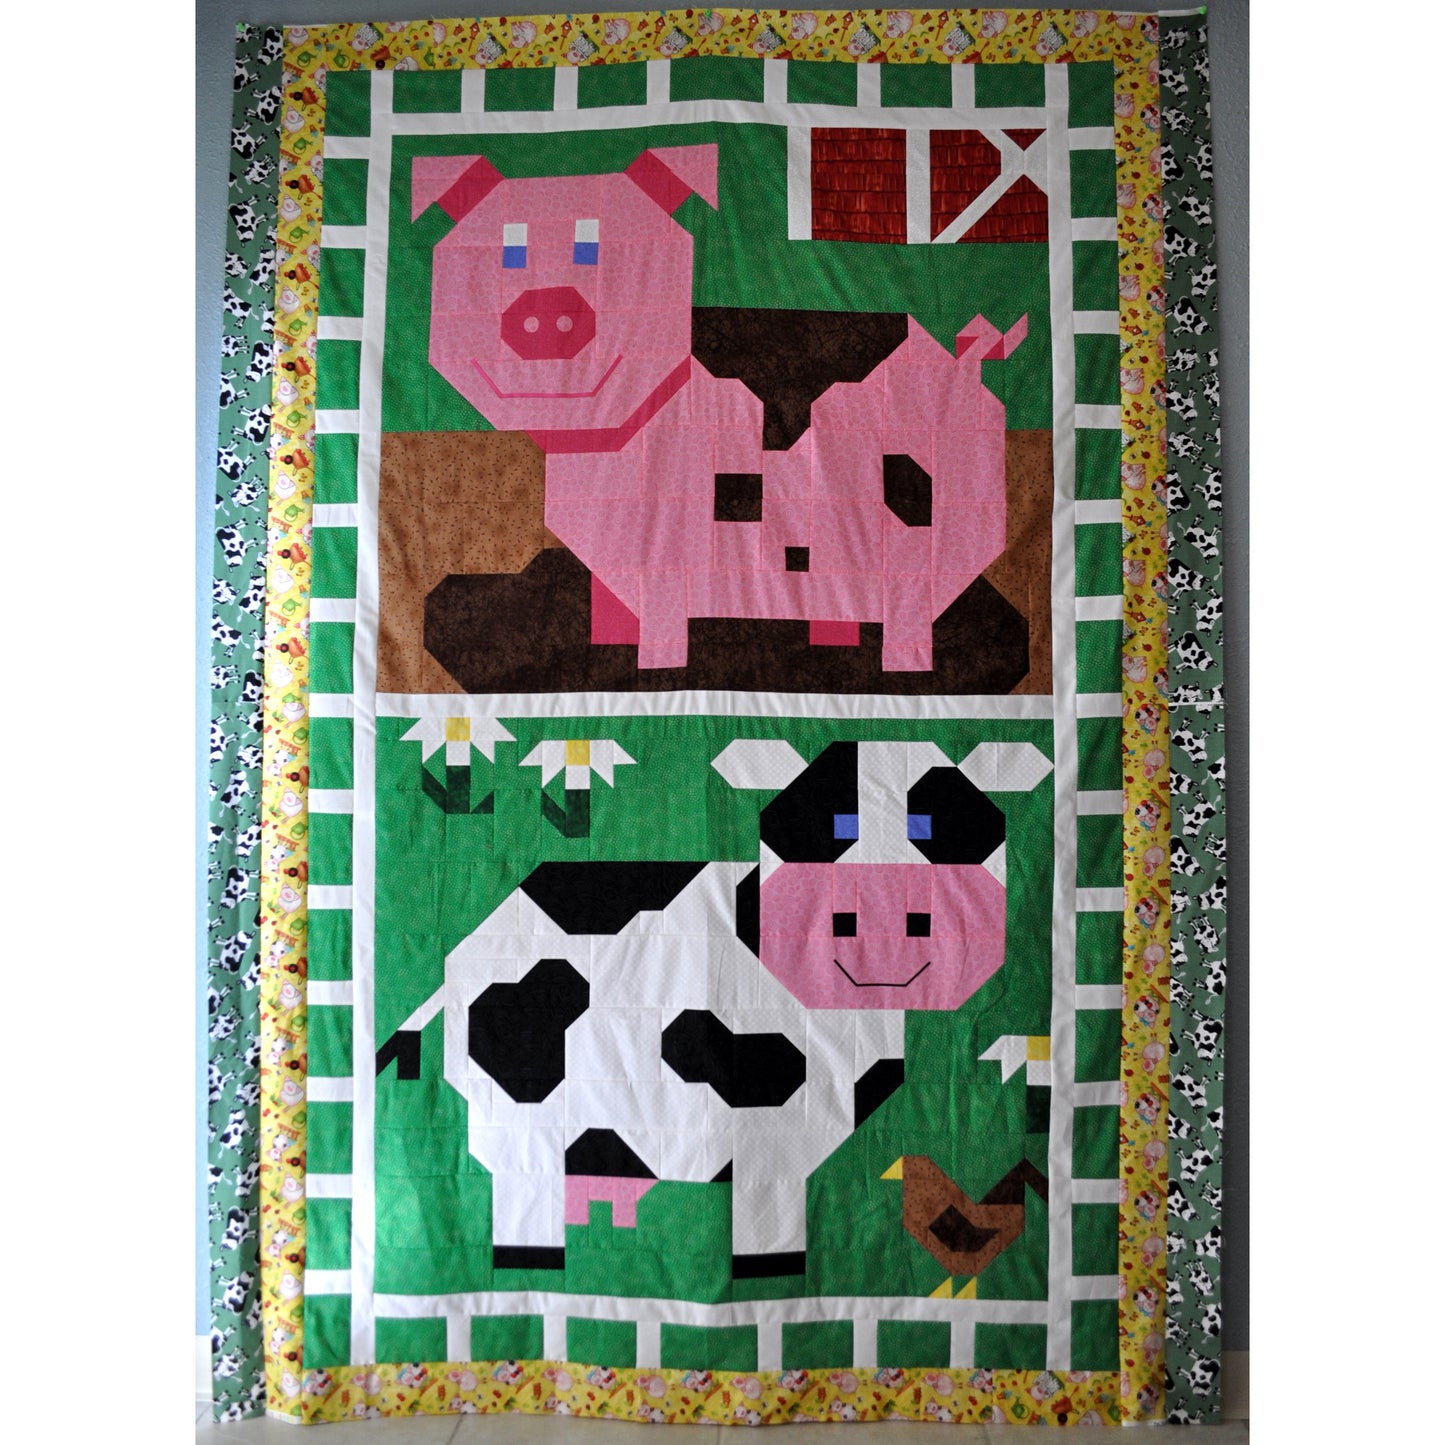 Adorable cow and pig quilt with top of pig smiling in a mud puddle and bottom of cow in grassy field.